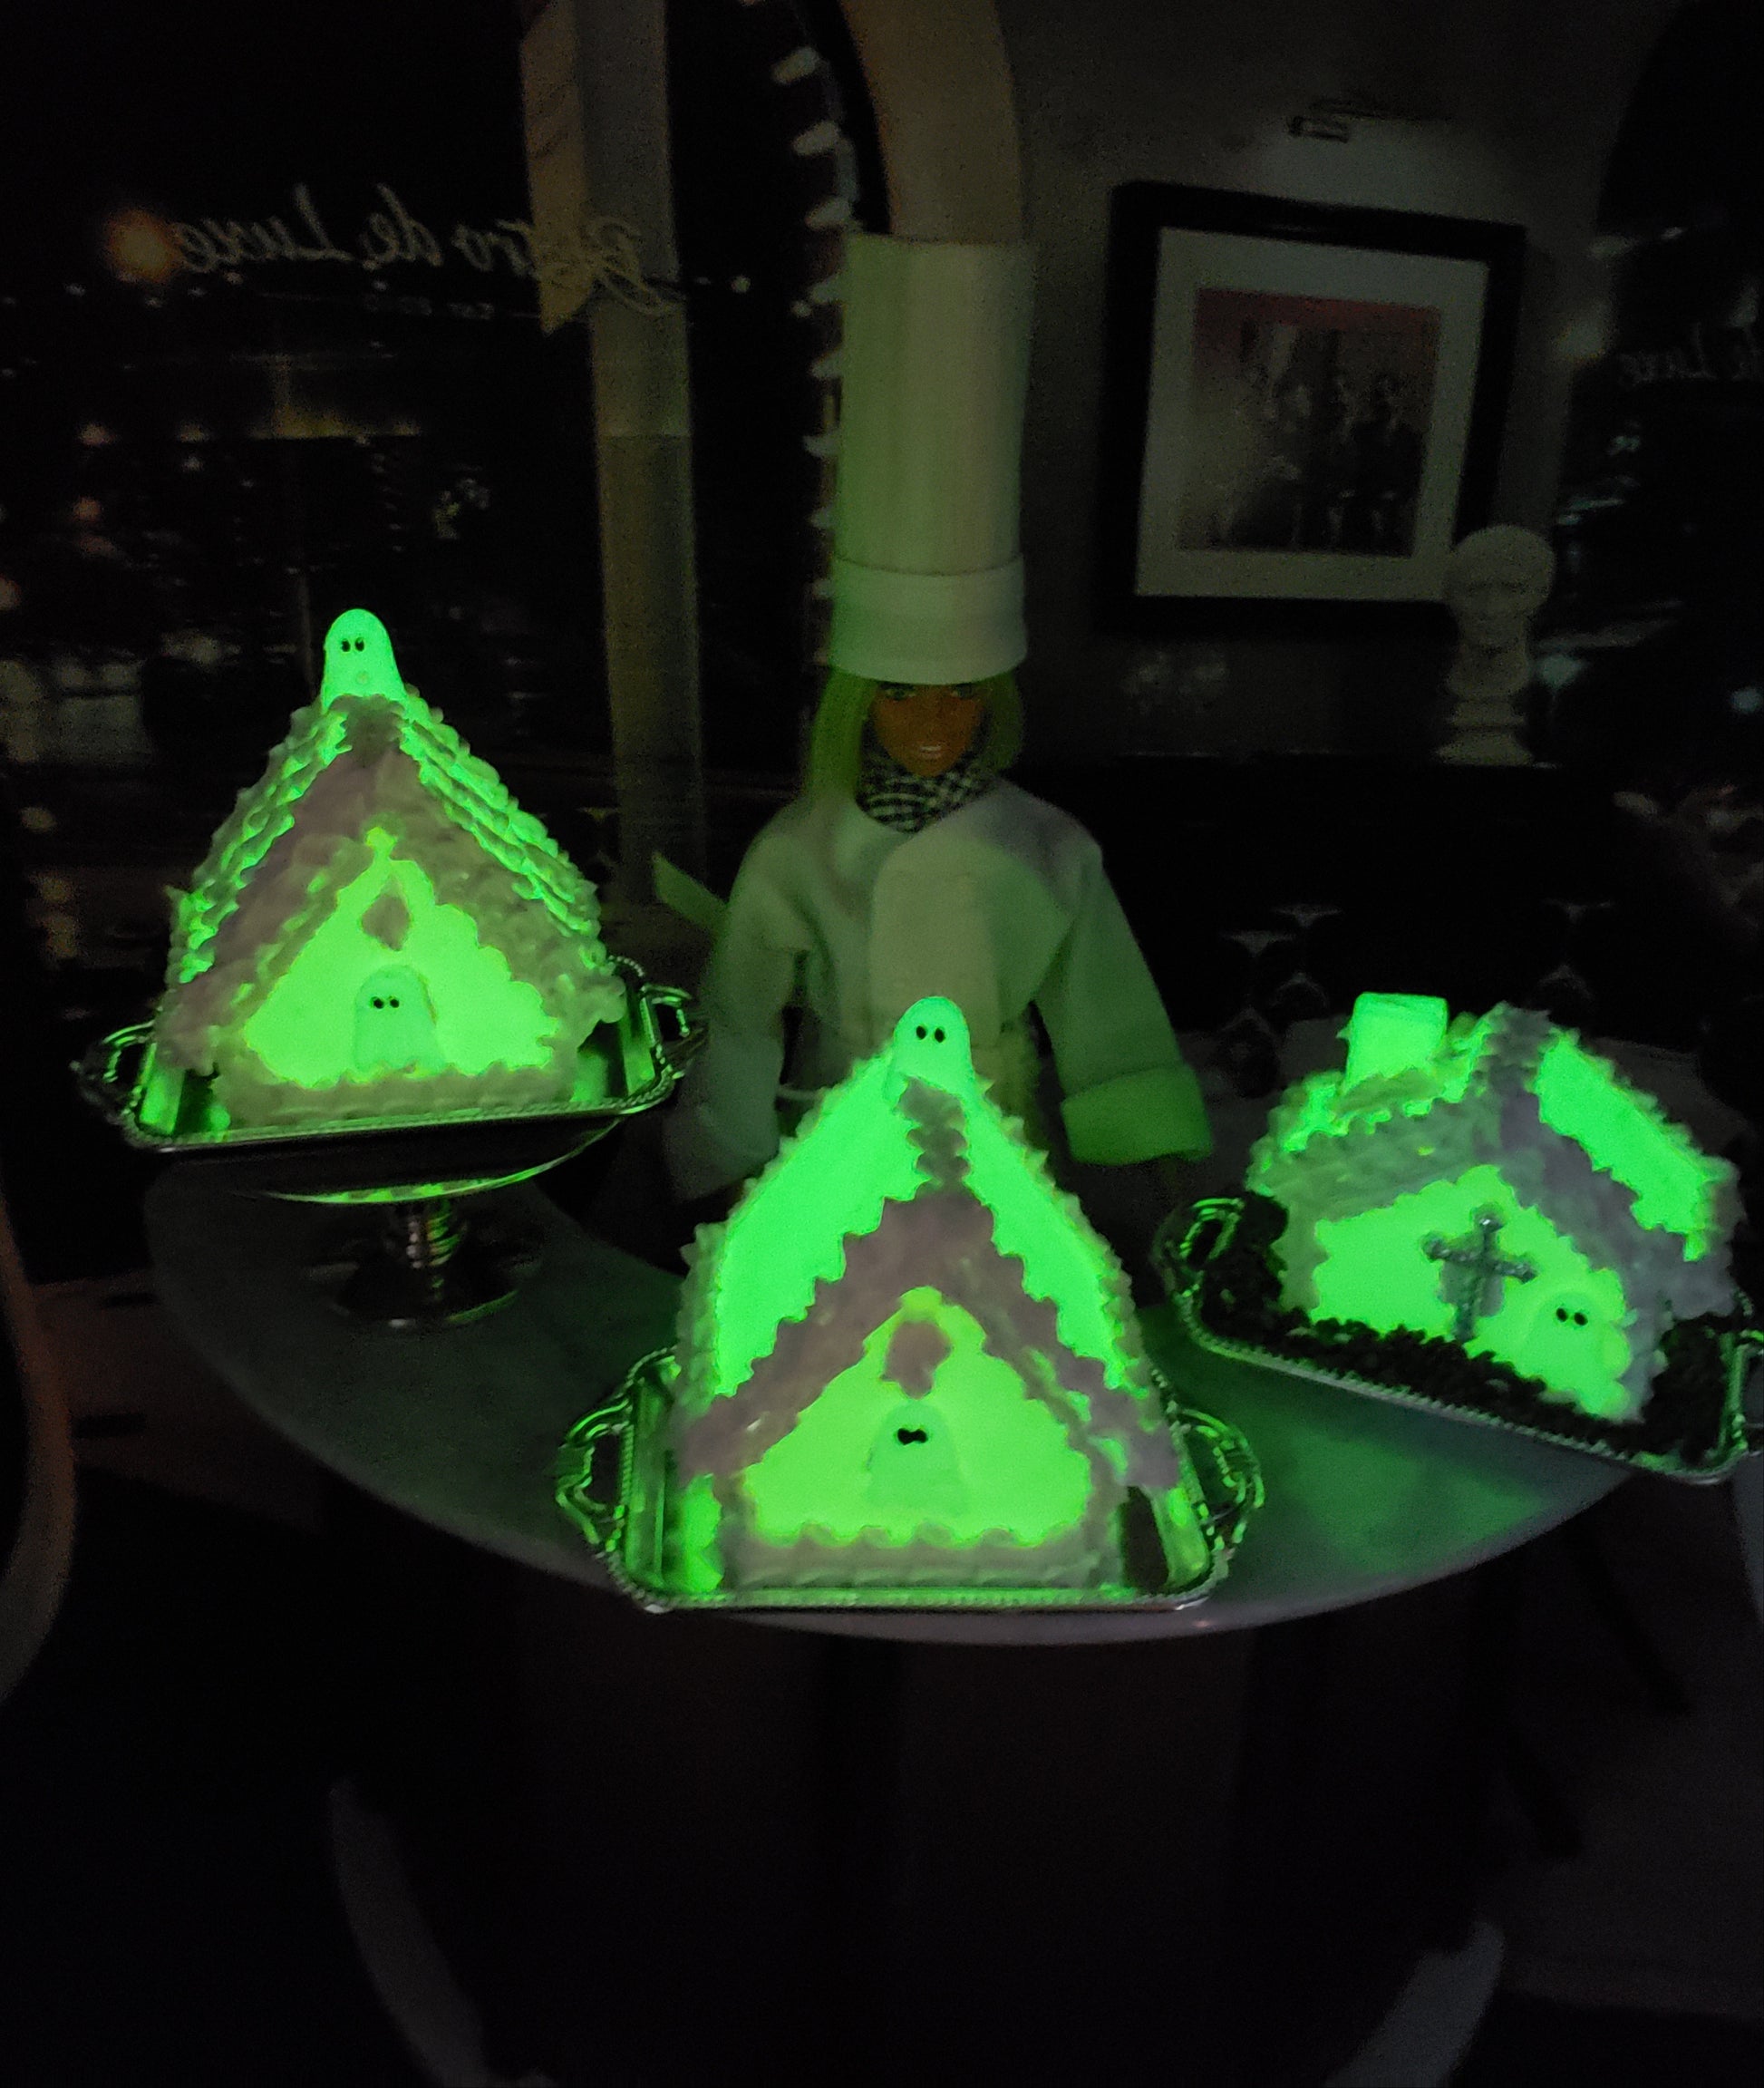 Barbie Doll with Glow in the dark gingerbread houses